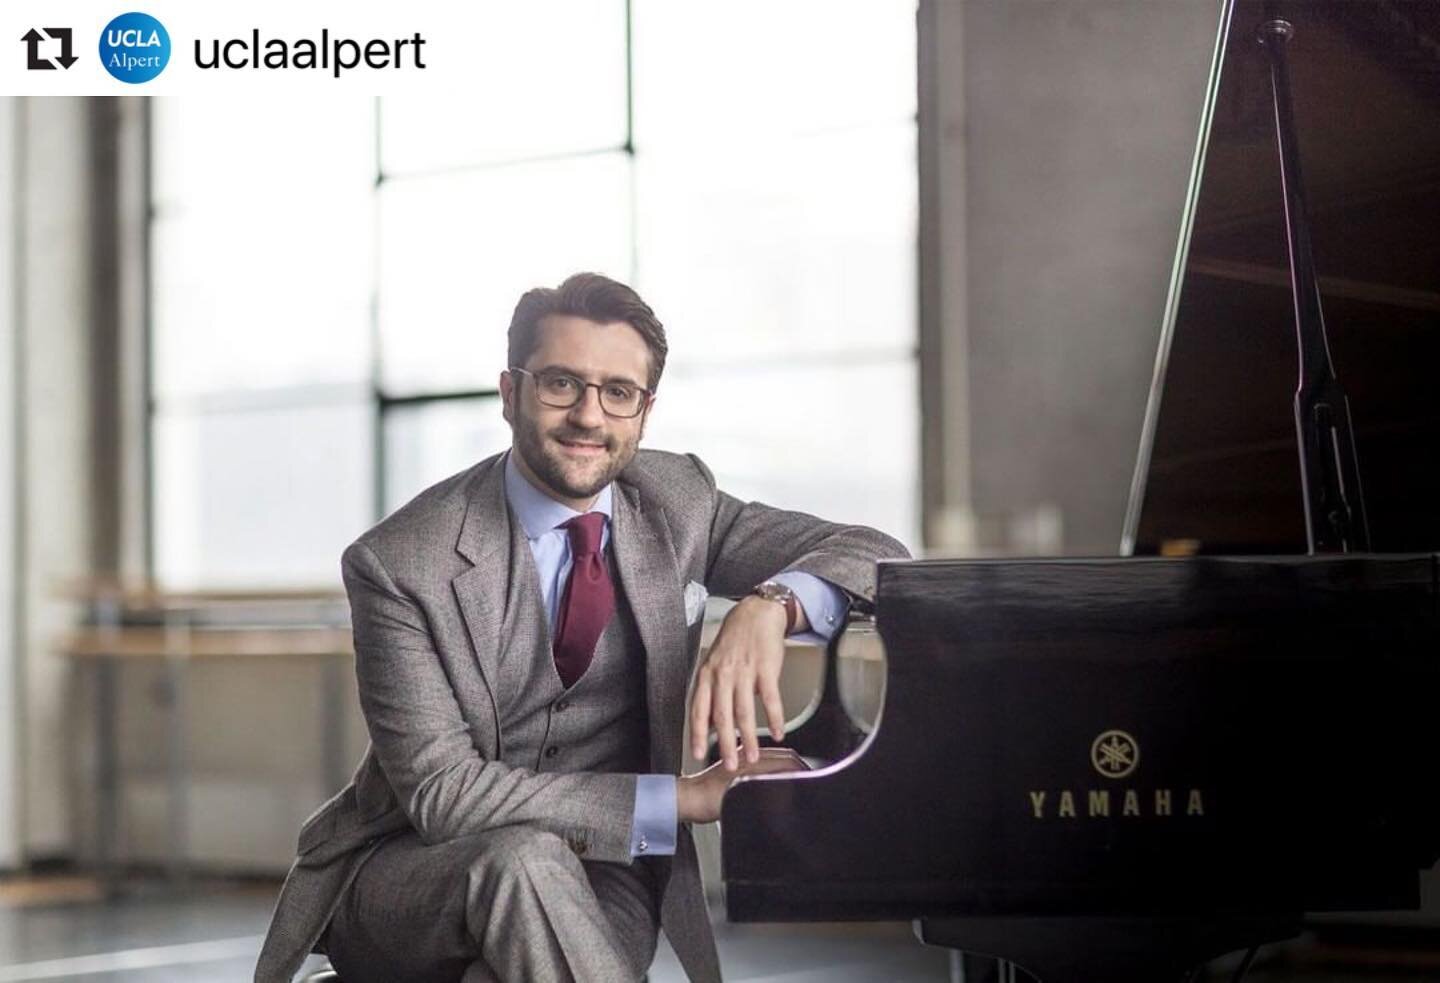 I&rsquo;m elated to share this news with you all!

#Repost @uclaalpert with @make_repost
・・・
We are thrilled to welcome UCLA alumnus, David Kaplan (B.A. &rsquo;05) as @UCLAalpert&rsquo;s new Assistant Professor of Piano Performance. 🎹⠀
⠀
&quot;I cou